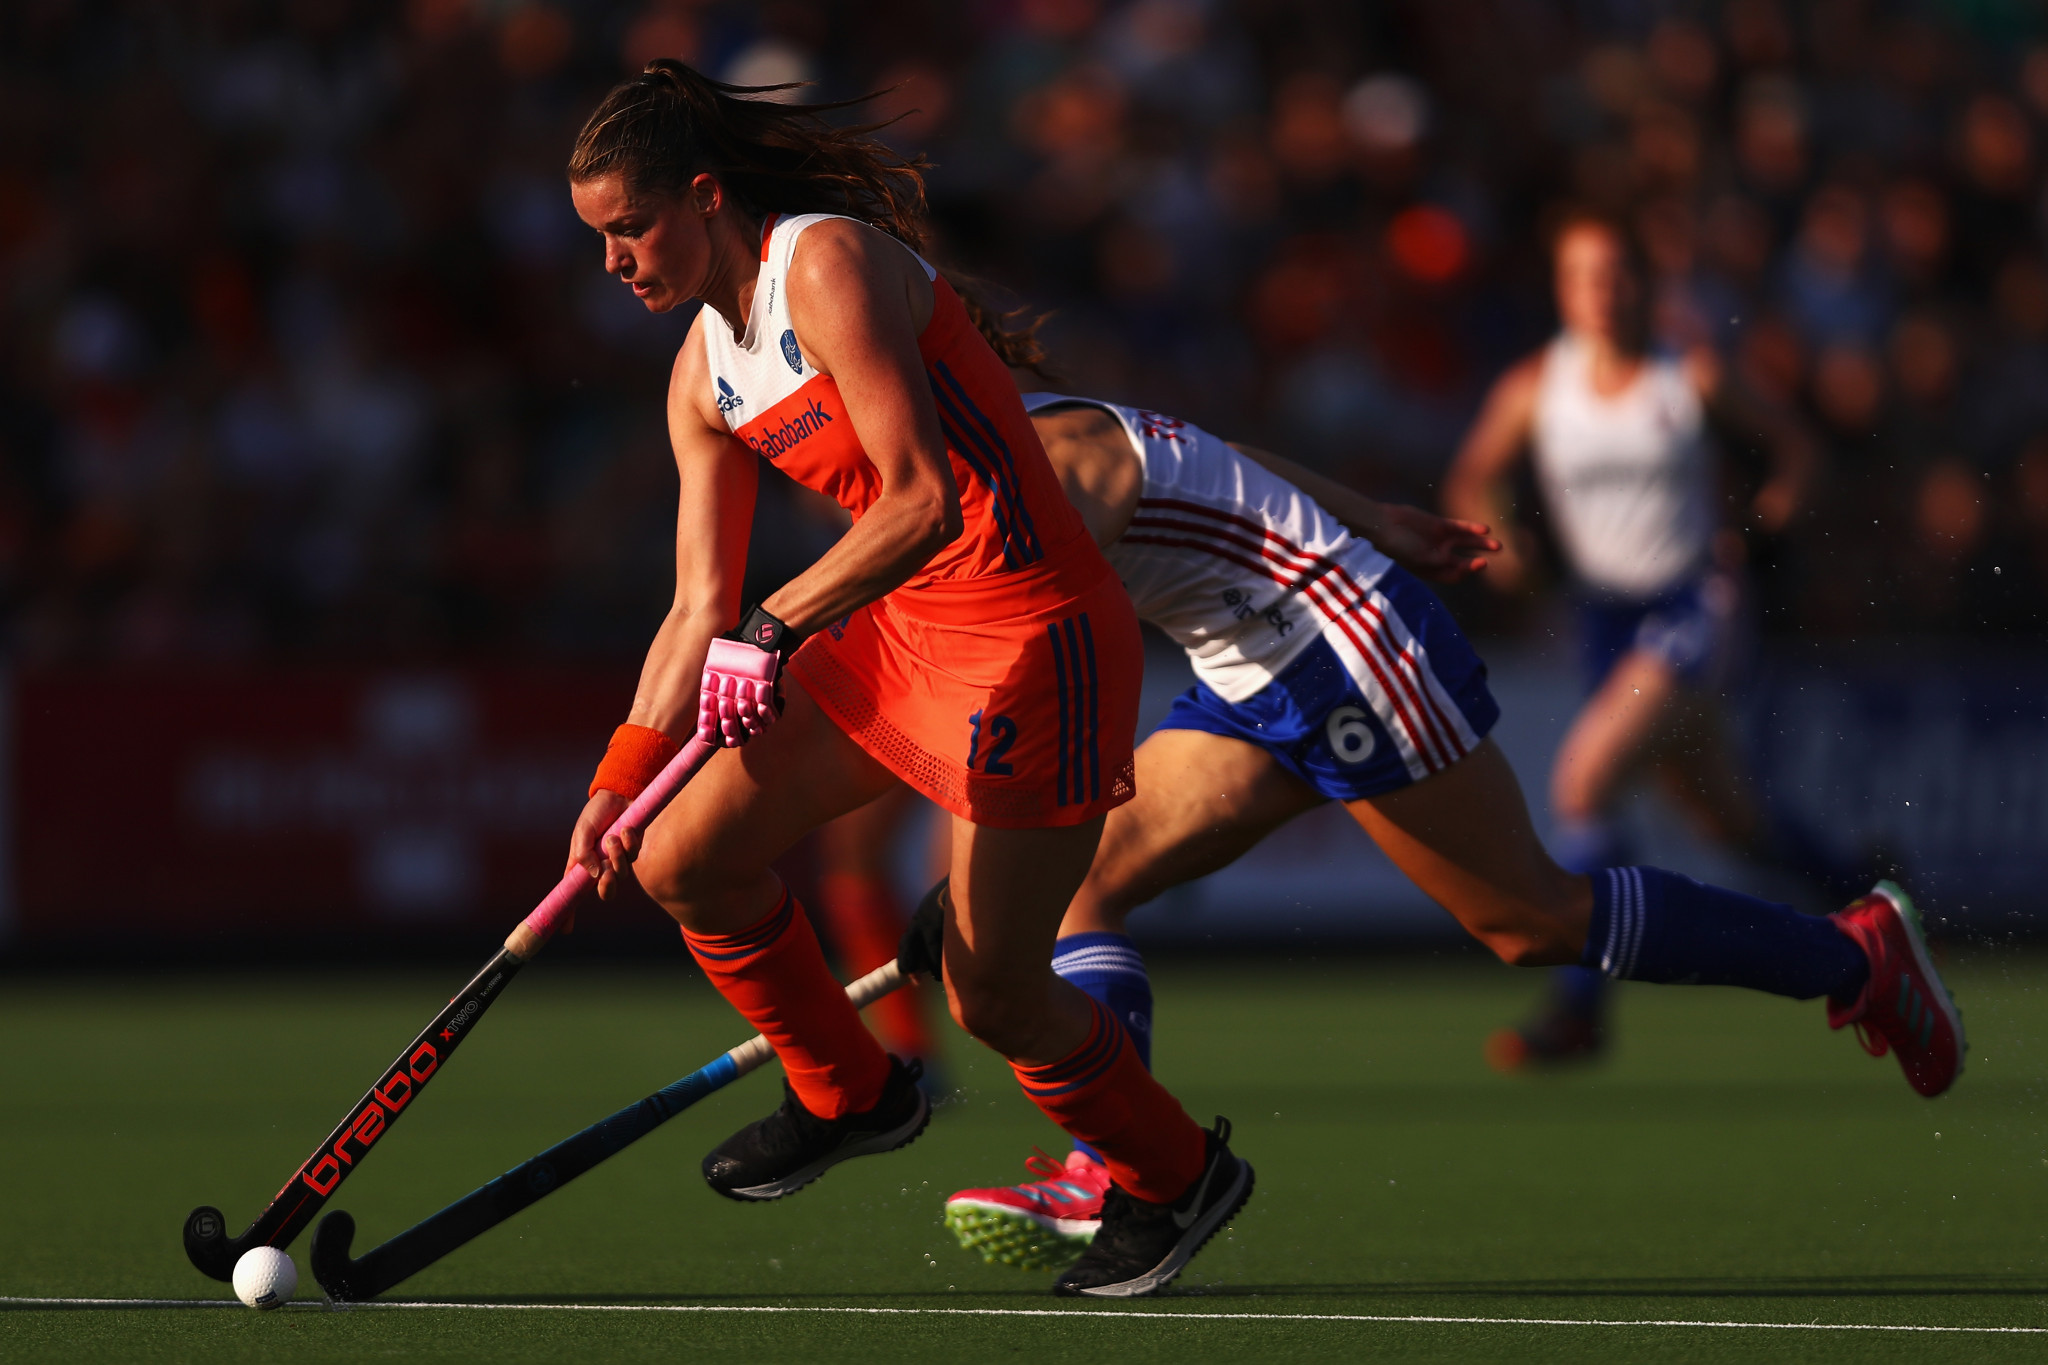 Two goals in the first 20 minutes were enough for the Dutch to beat Britain ©Getty Images